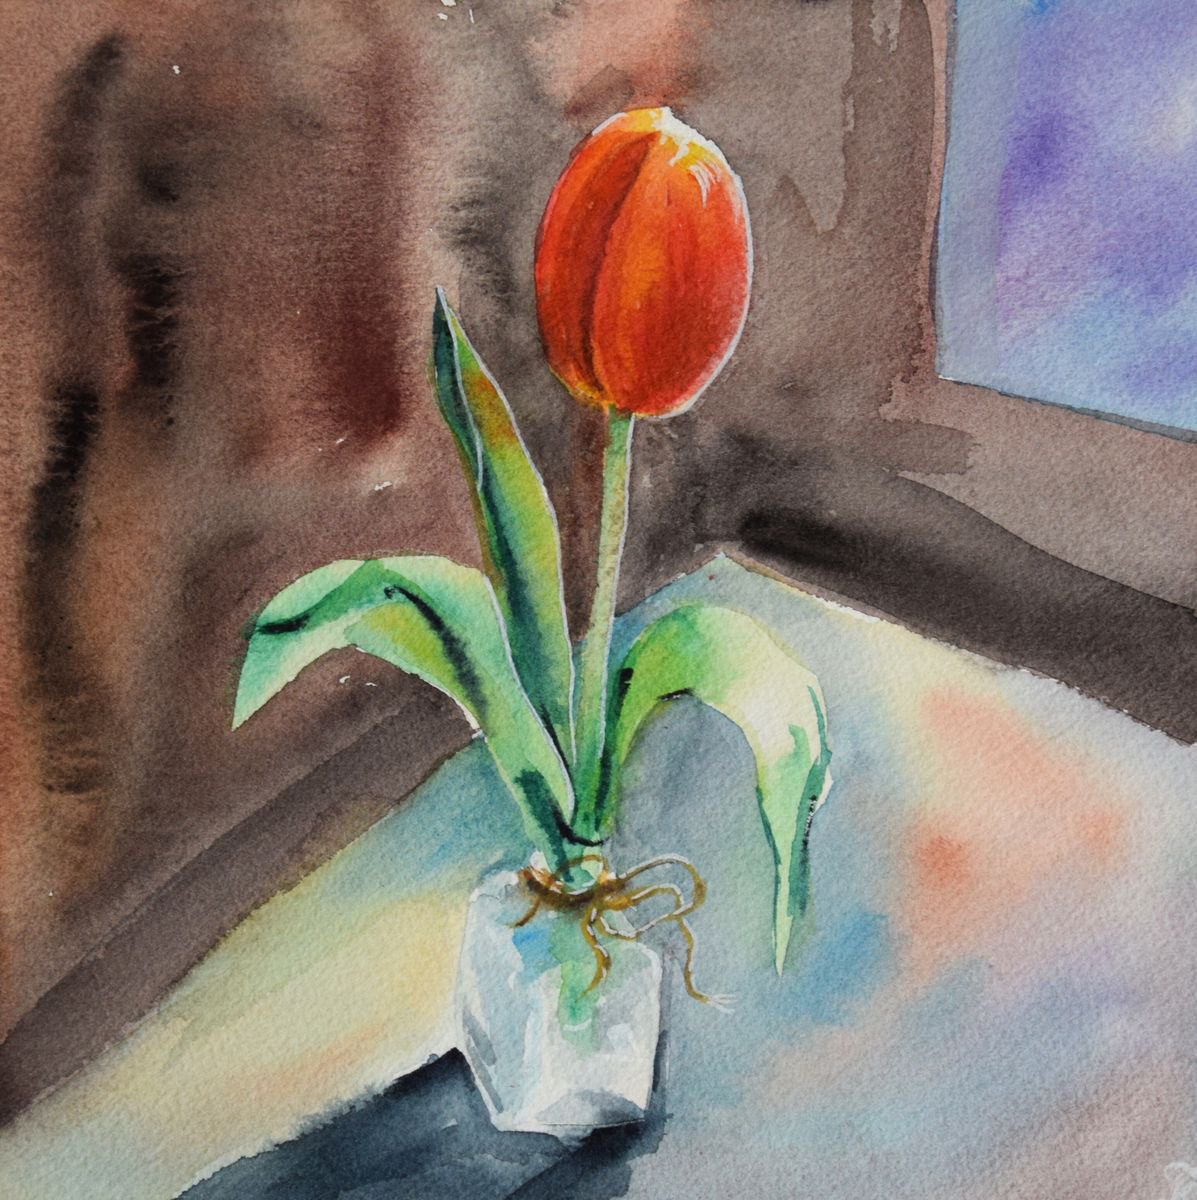 Flower tulip original watercolor painting, Mother’s Day gift, botanical still life by Kate Grishakova